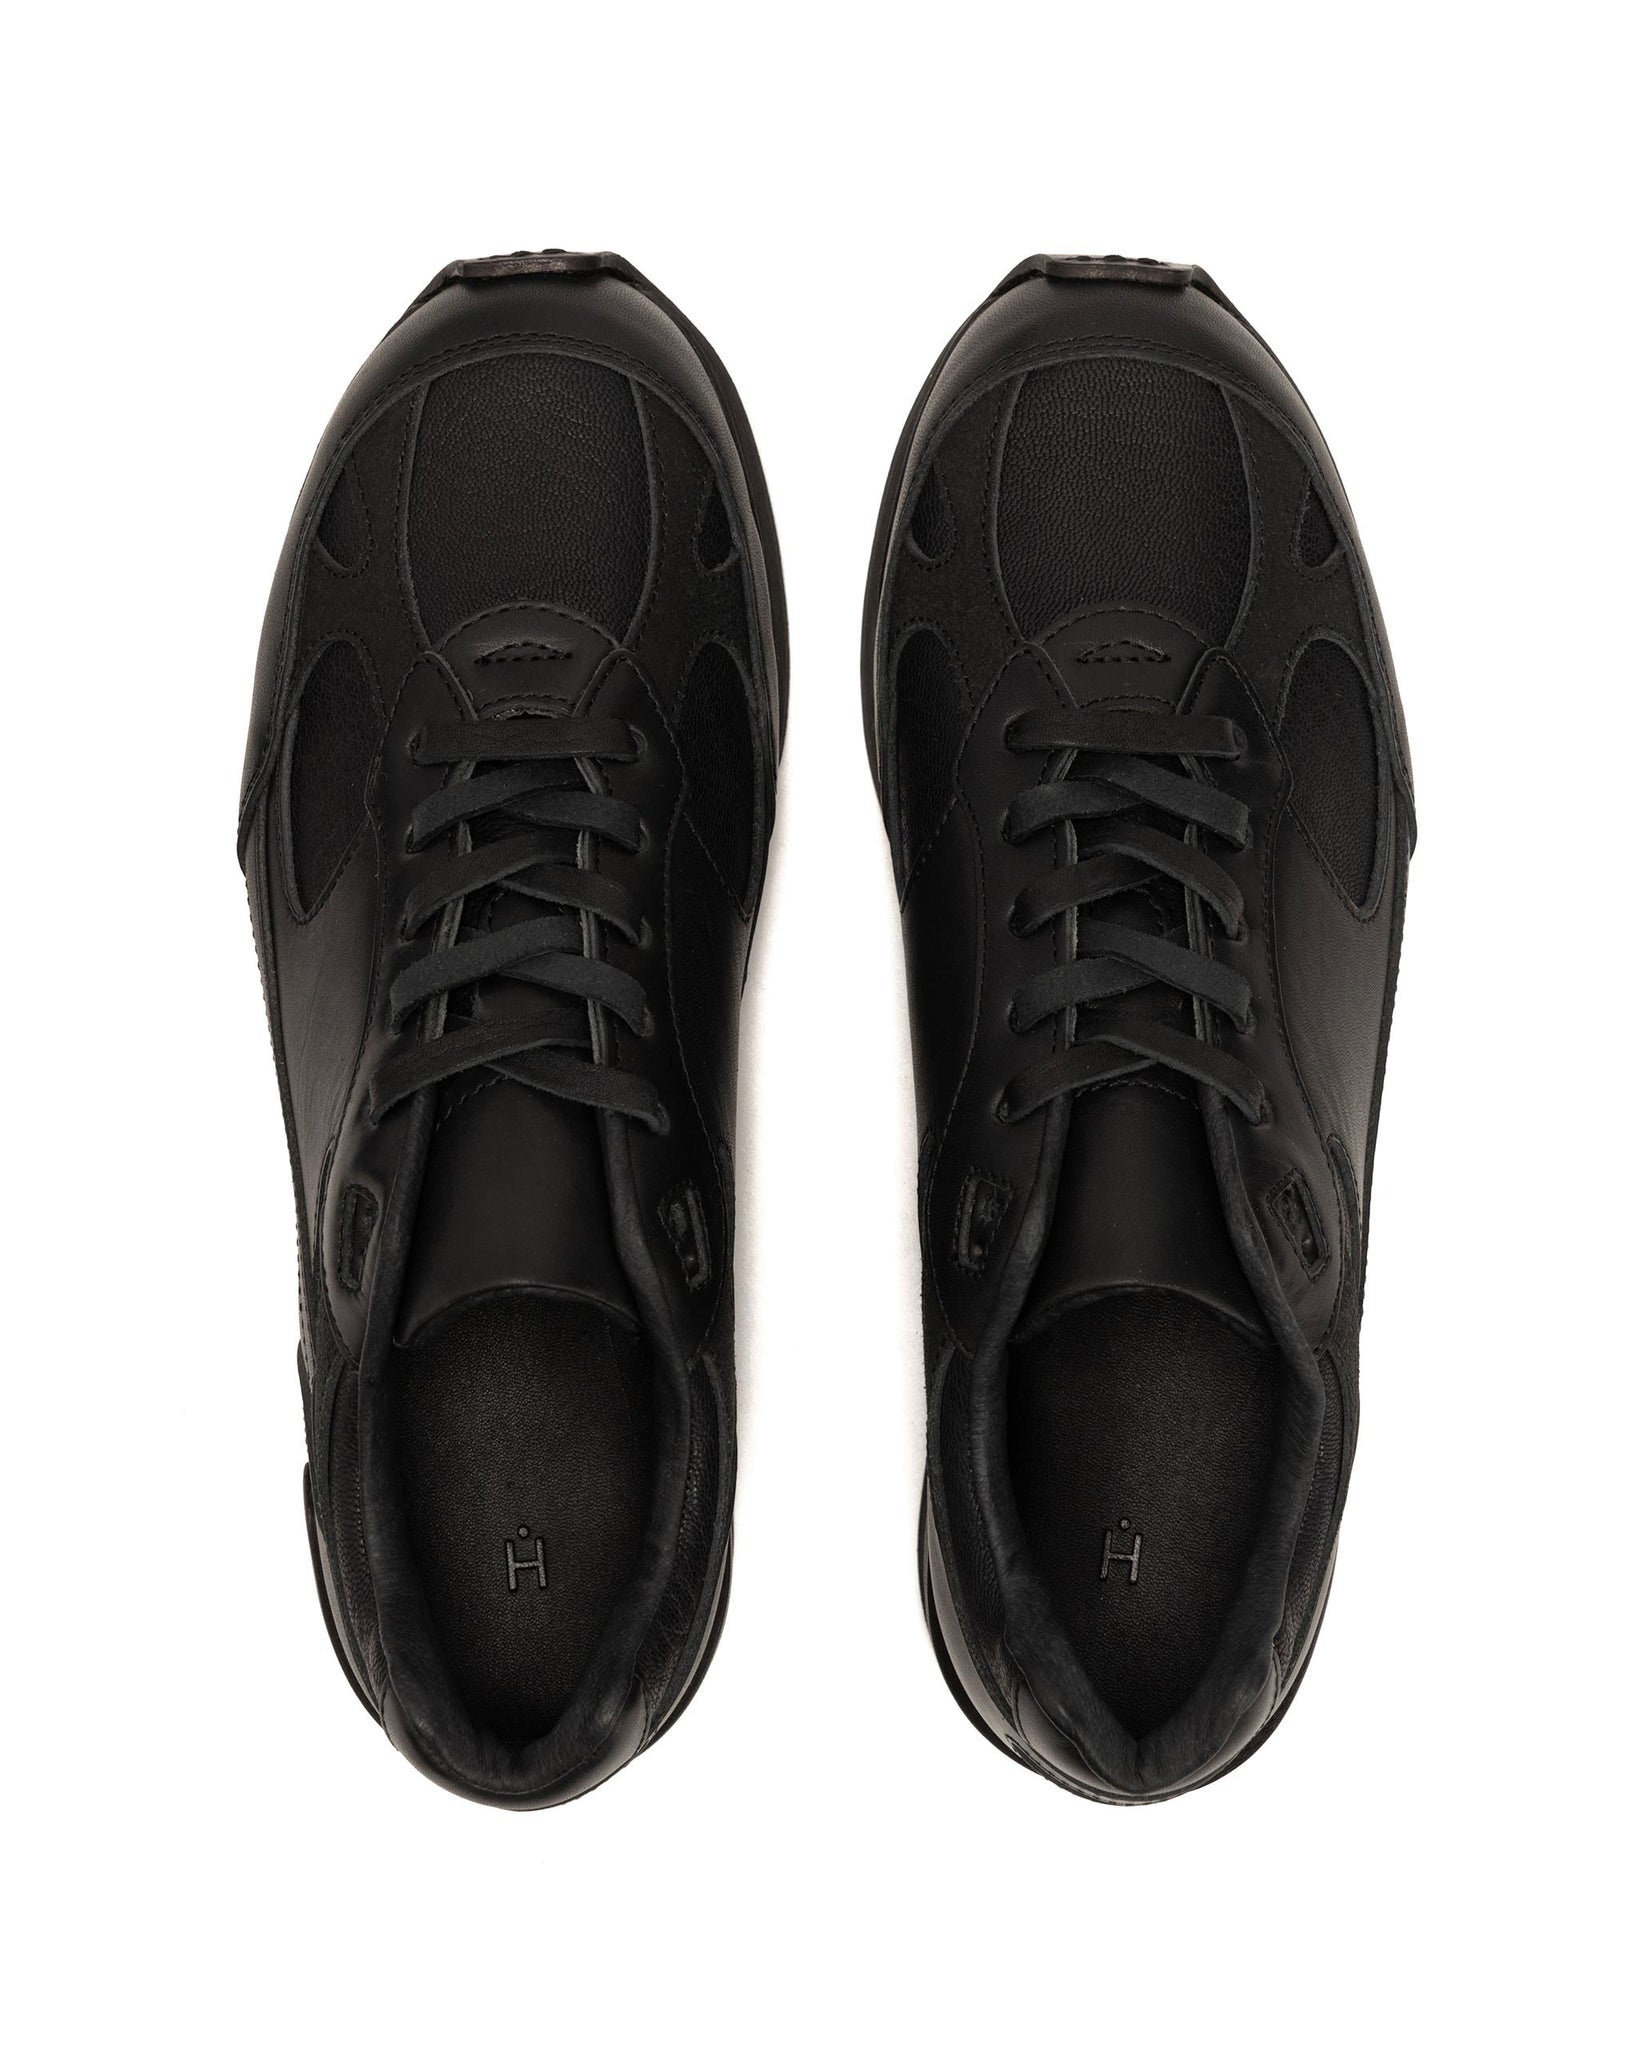 Manual Industrial Products 28 Shoes Black - 4